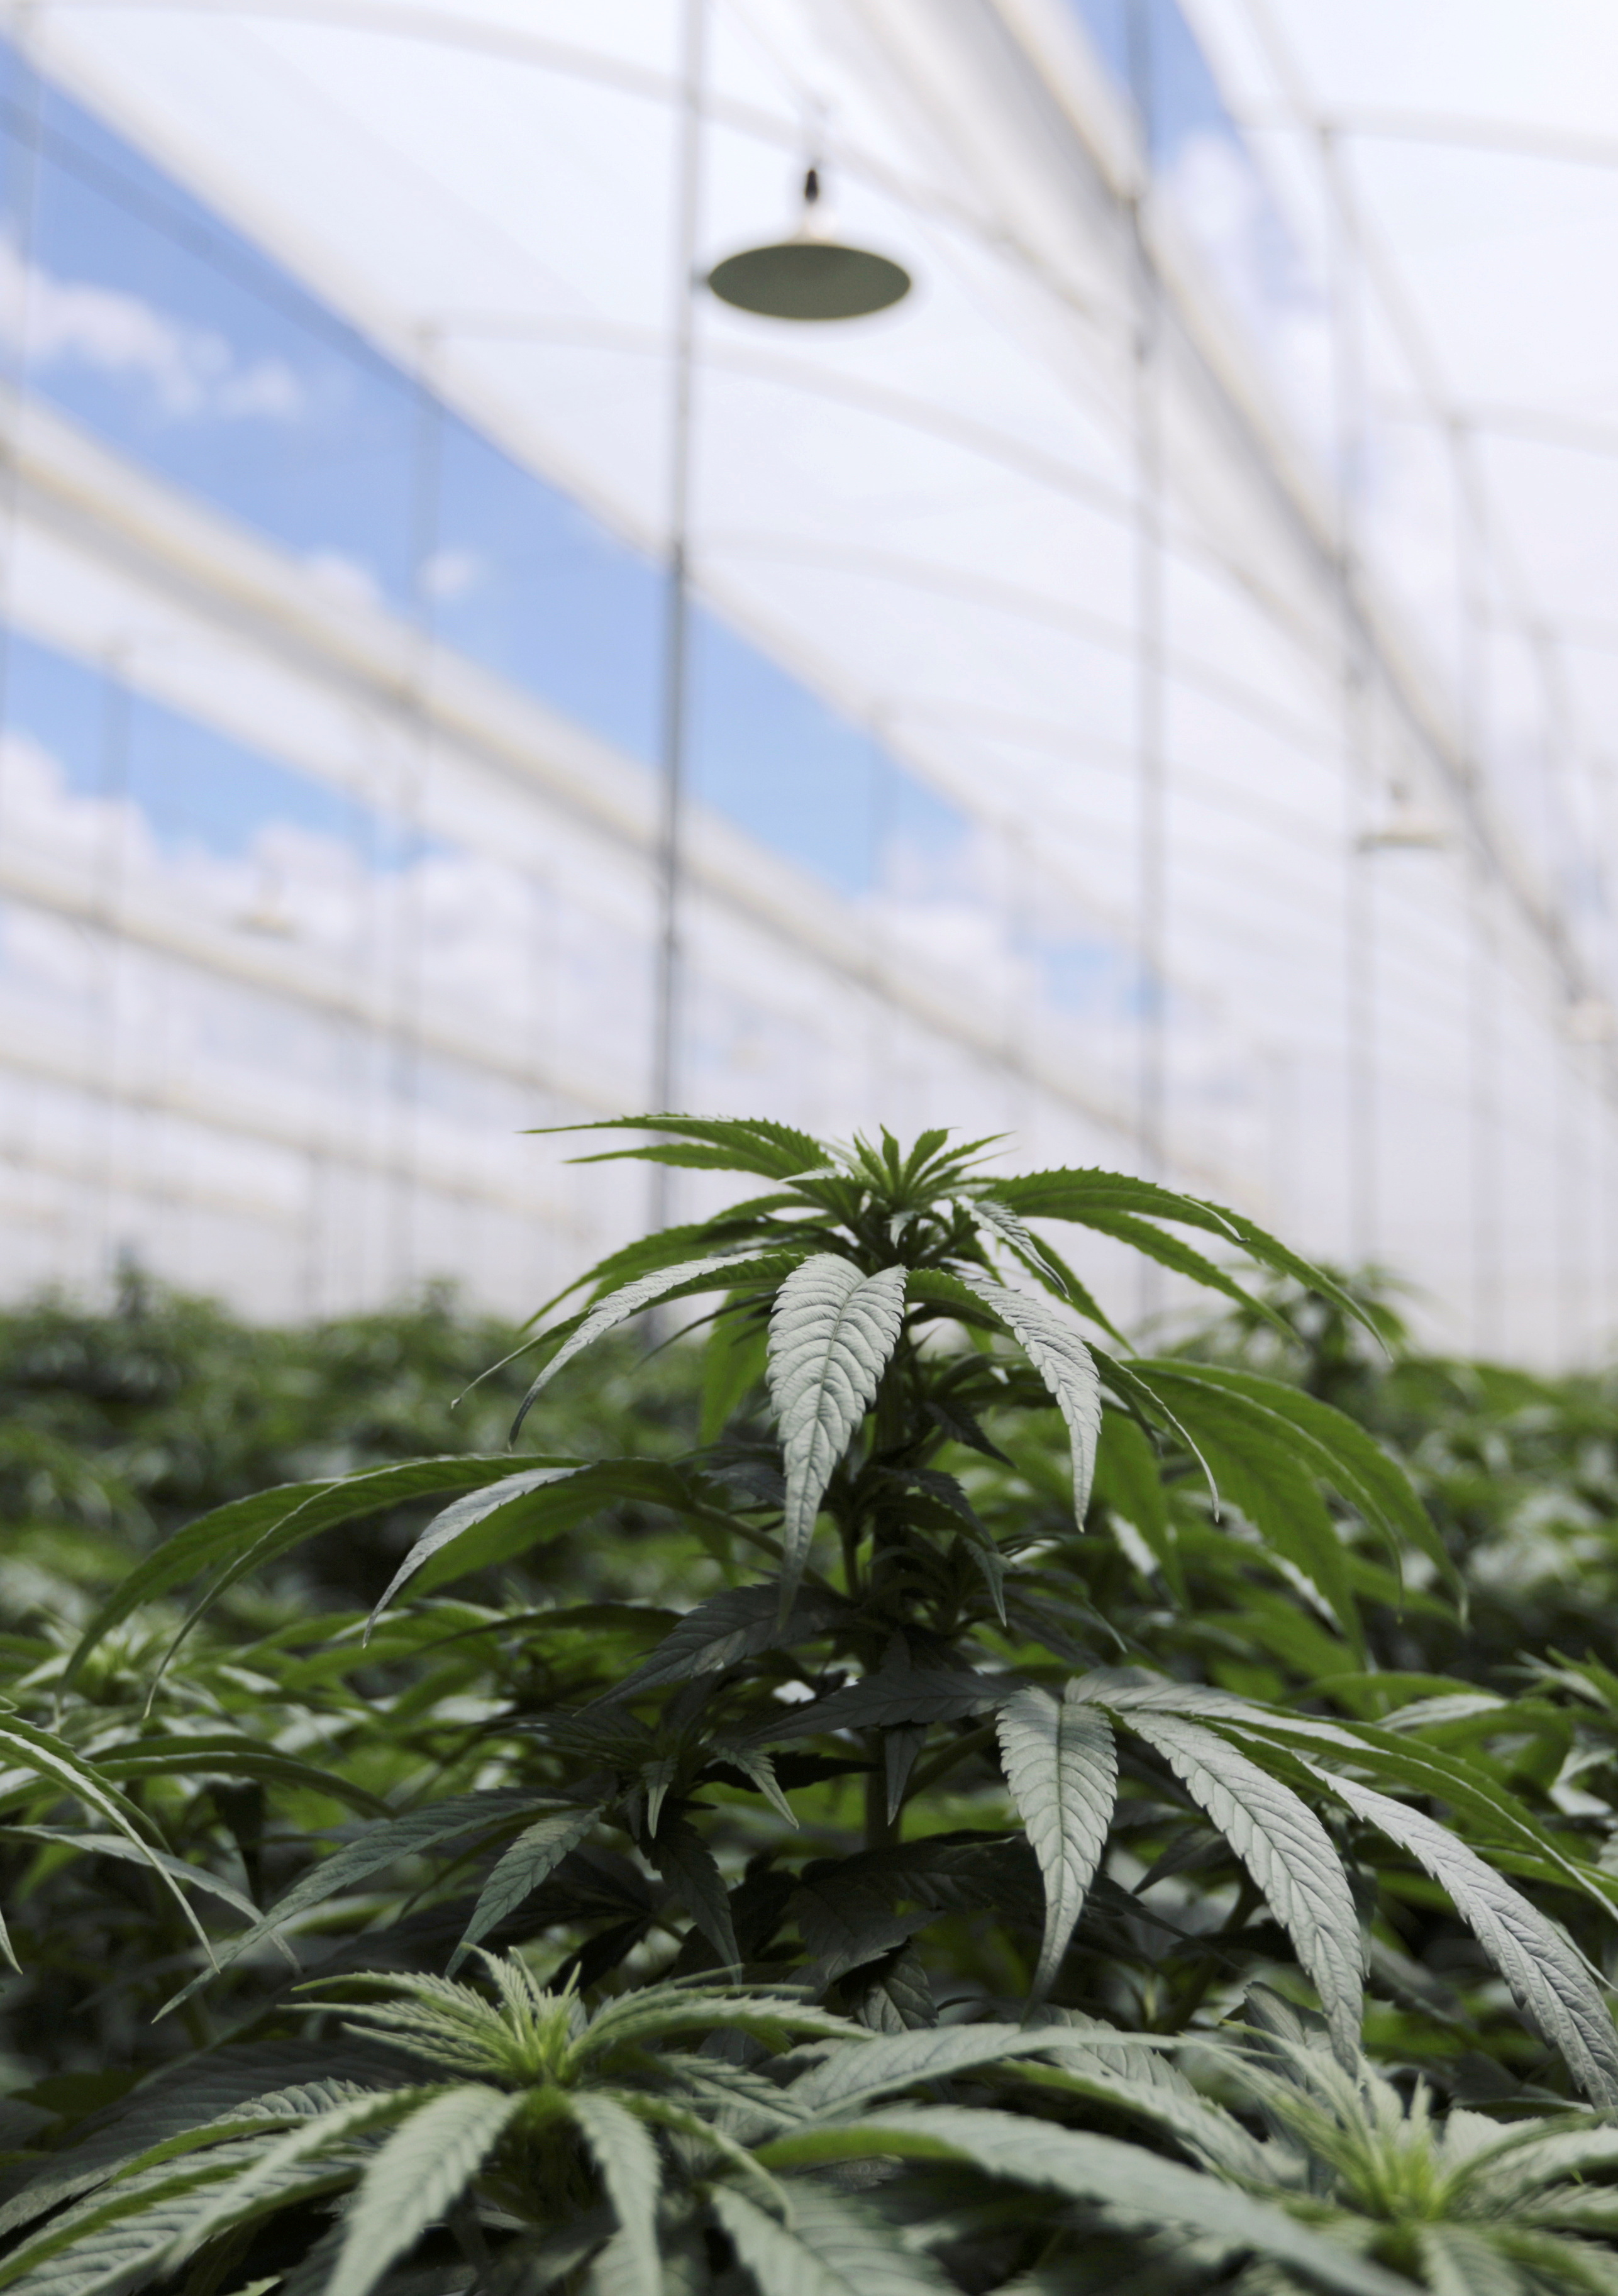 Cannabis plants are seen inside a greenhouse  in Colombia